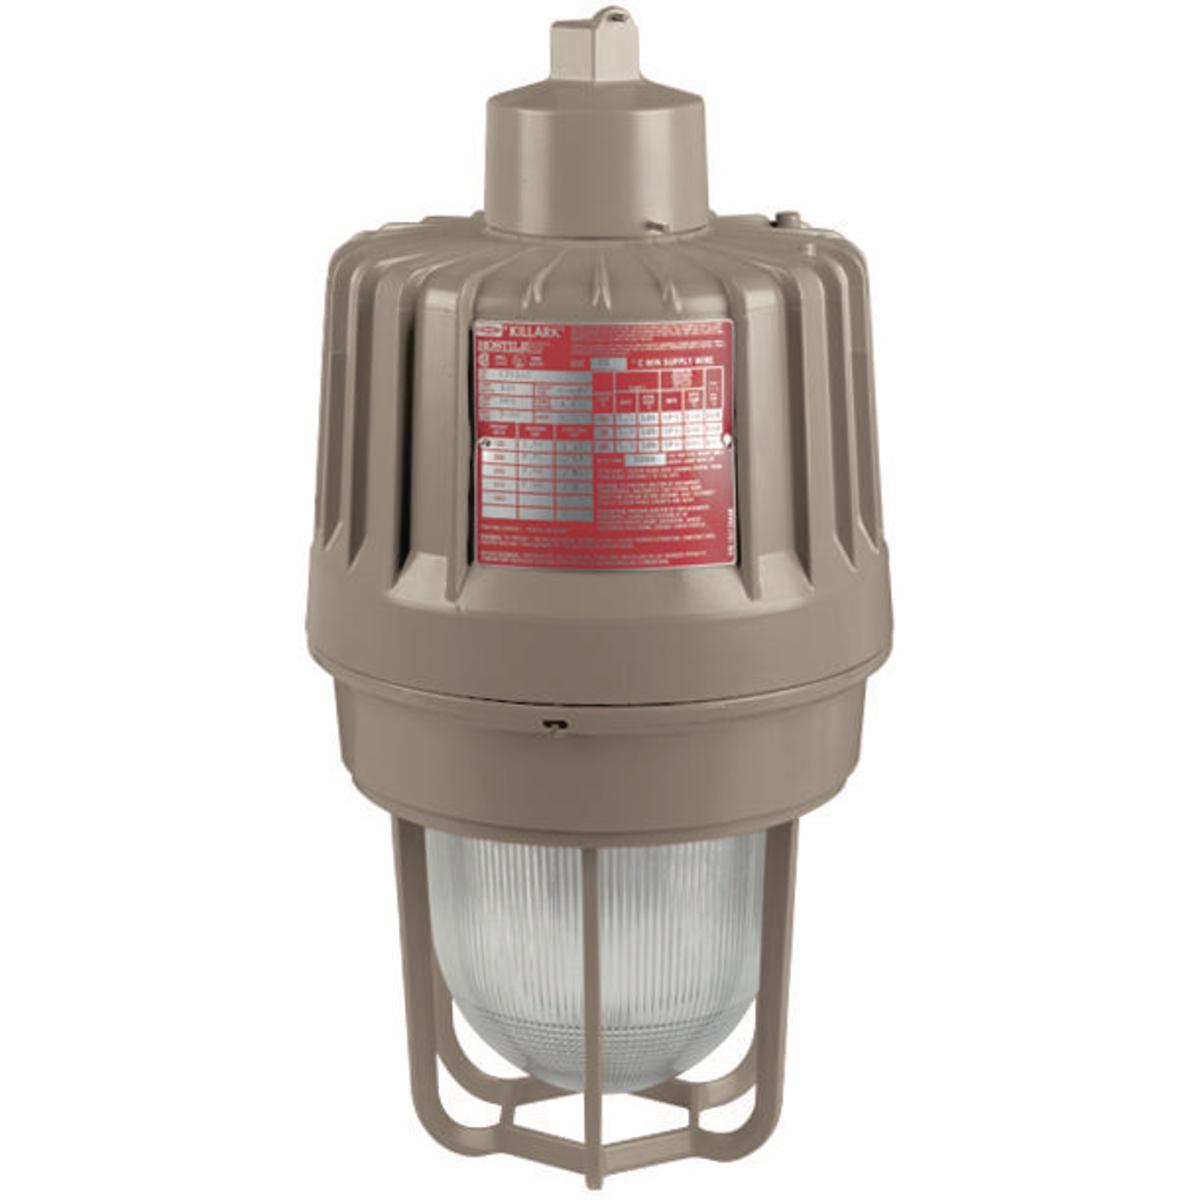 Hubbell EZS250A3 HID 250W Quadri-Volt High Pressure Sodium 1" Pendant  ; Three light sources – High Pressure Sodium (50-400W), Metal Halide (70-400W) and Pulse Start Metal Halide (175-400W) ; Mounting choice –Pendant, ceiling, 25˚ stanchion or 90˚ wall mount, all with “wi